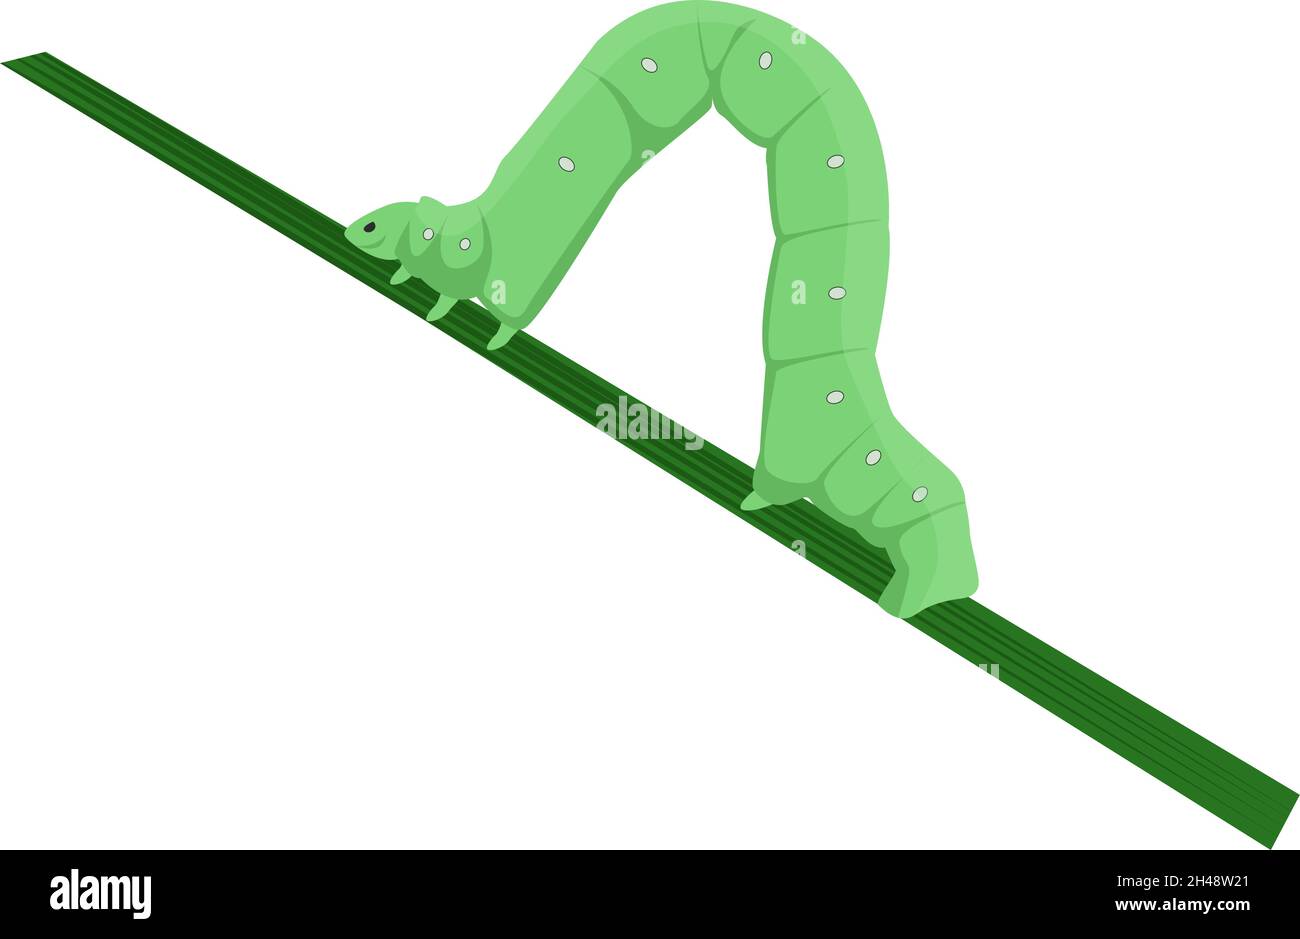 Inch worm, illustration, vector on a white background. Stock Vector